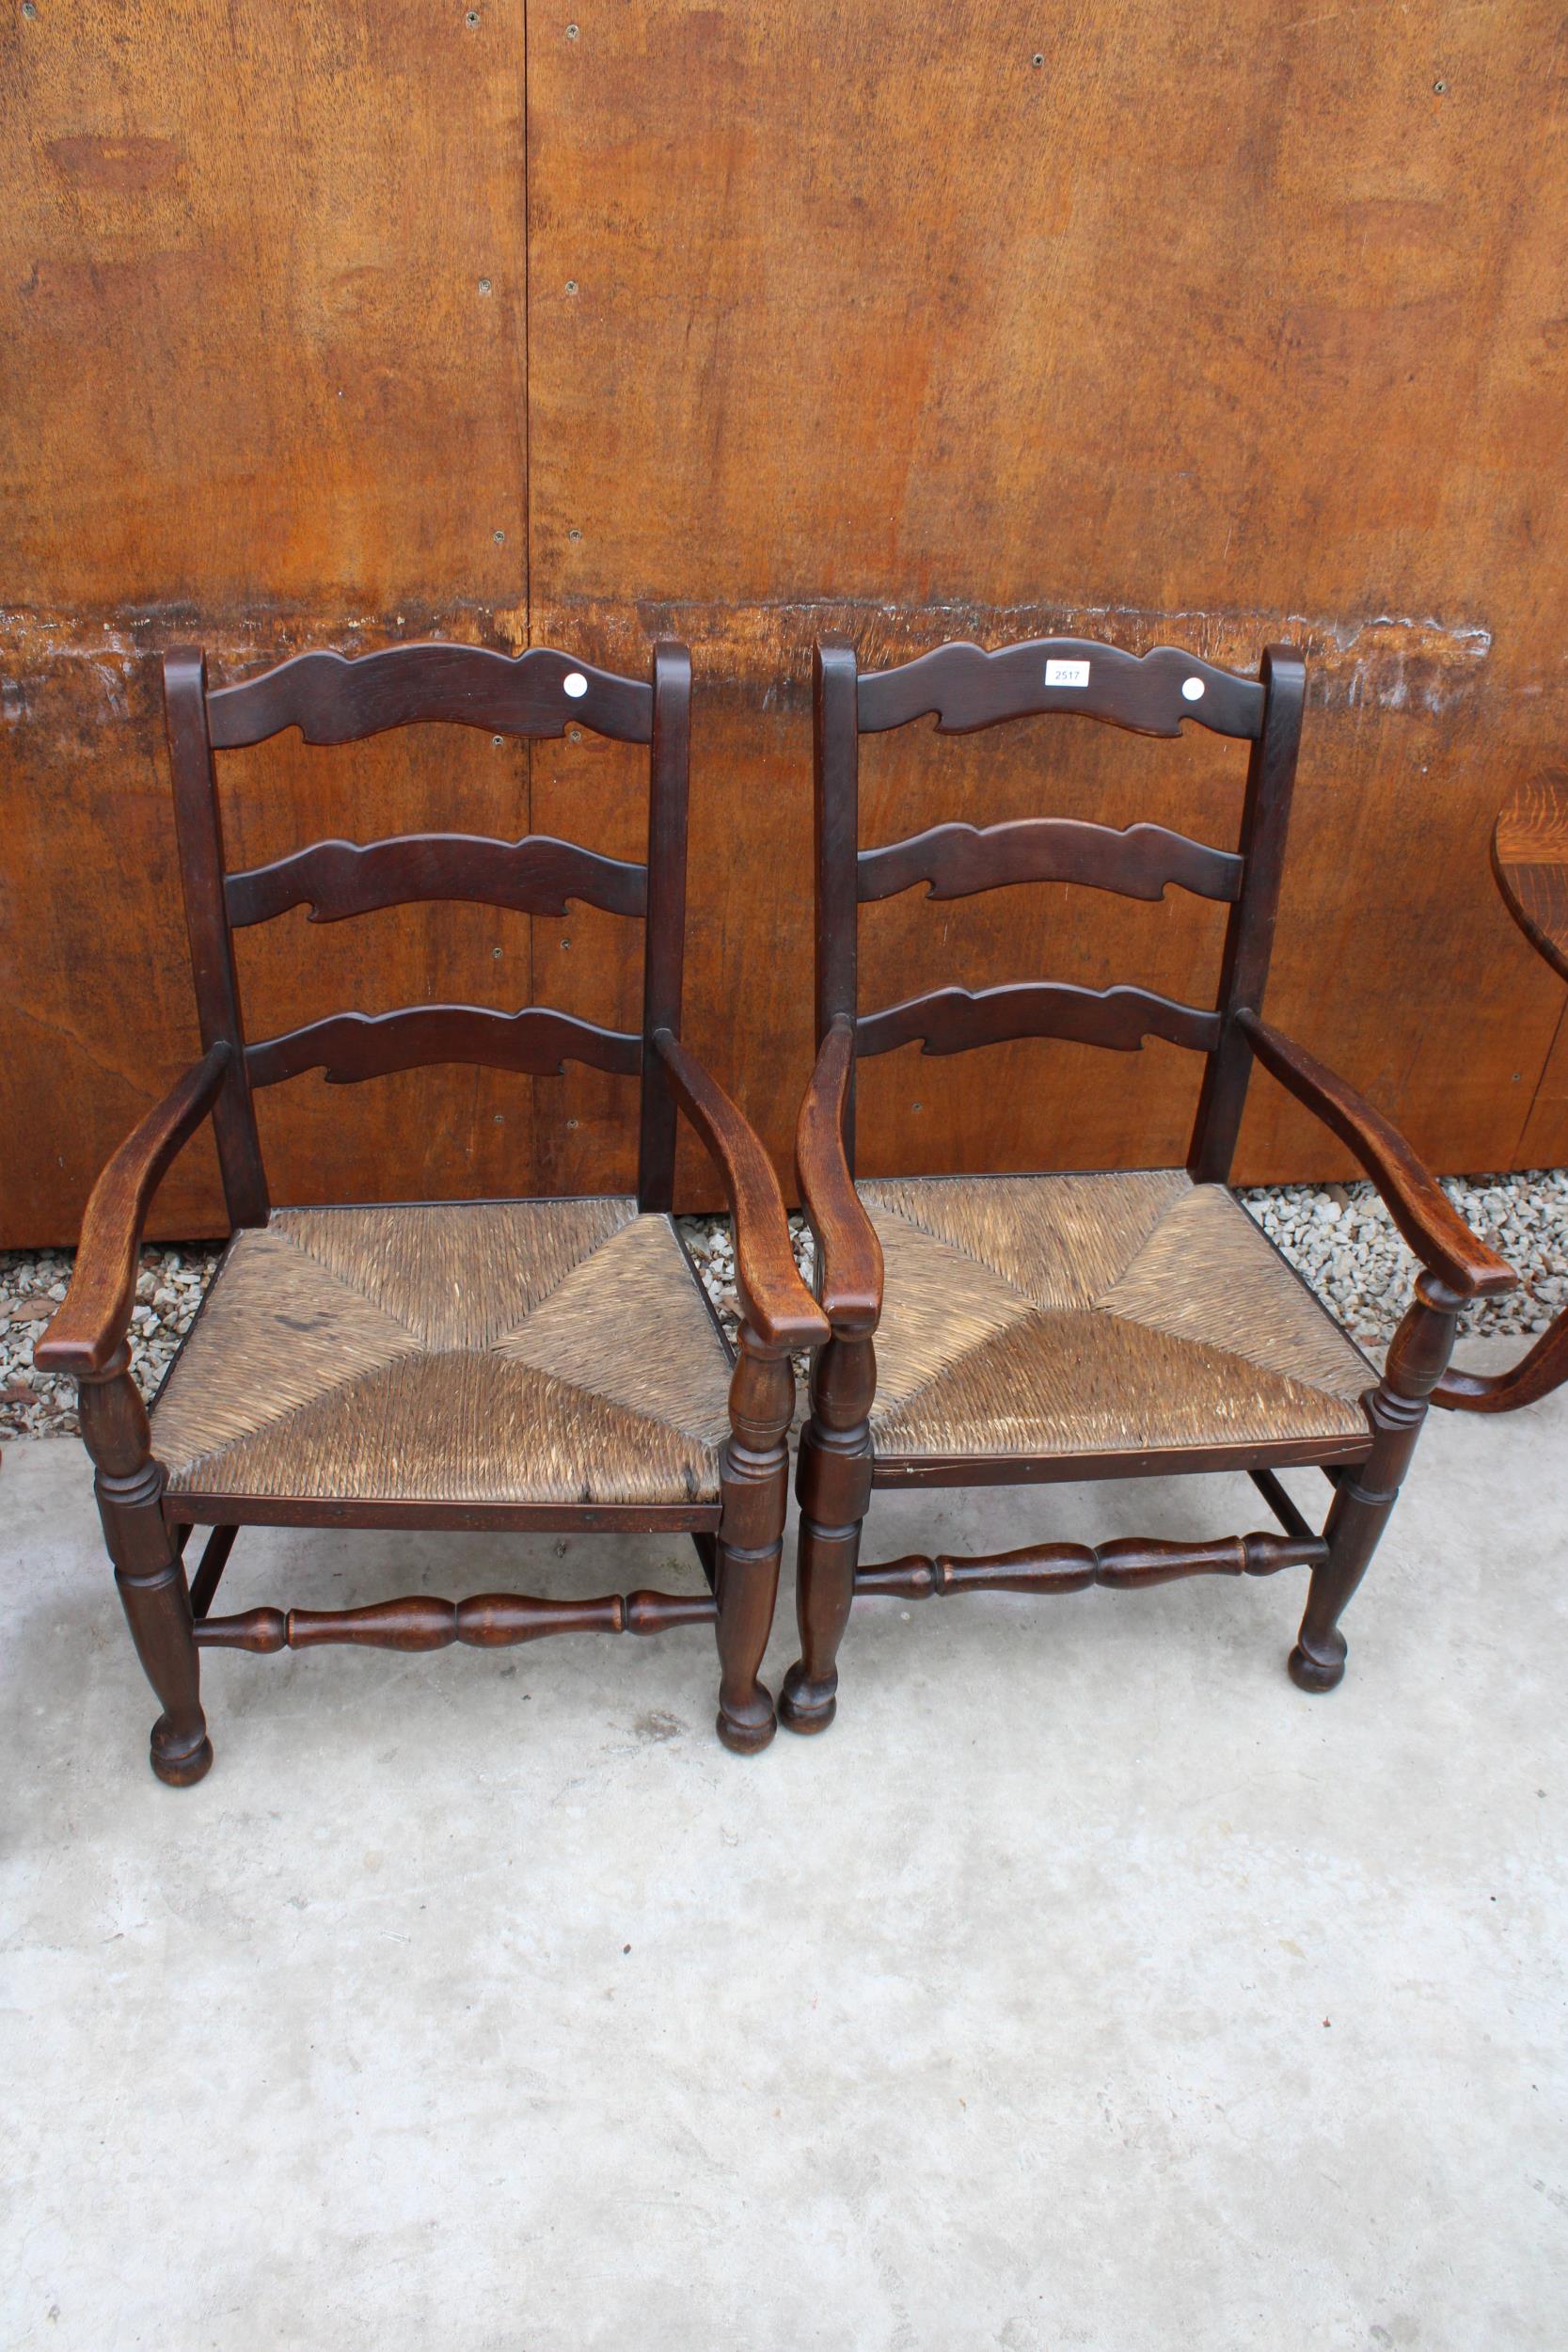 A PAIR OF 18TH CENTURY STYLE LOW OAK LADDER-BACK ELBOW CHAIRS WITH RUSH SEATS